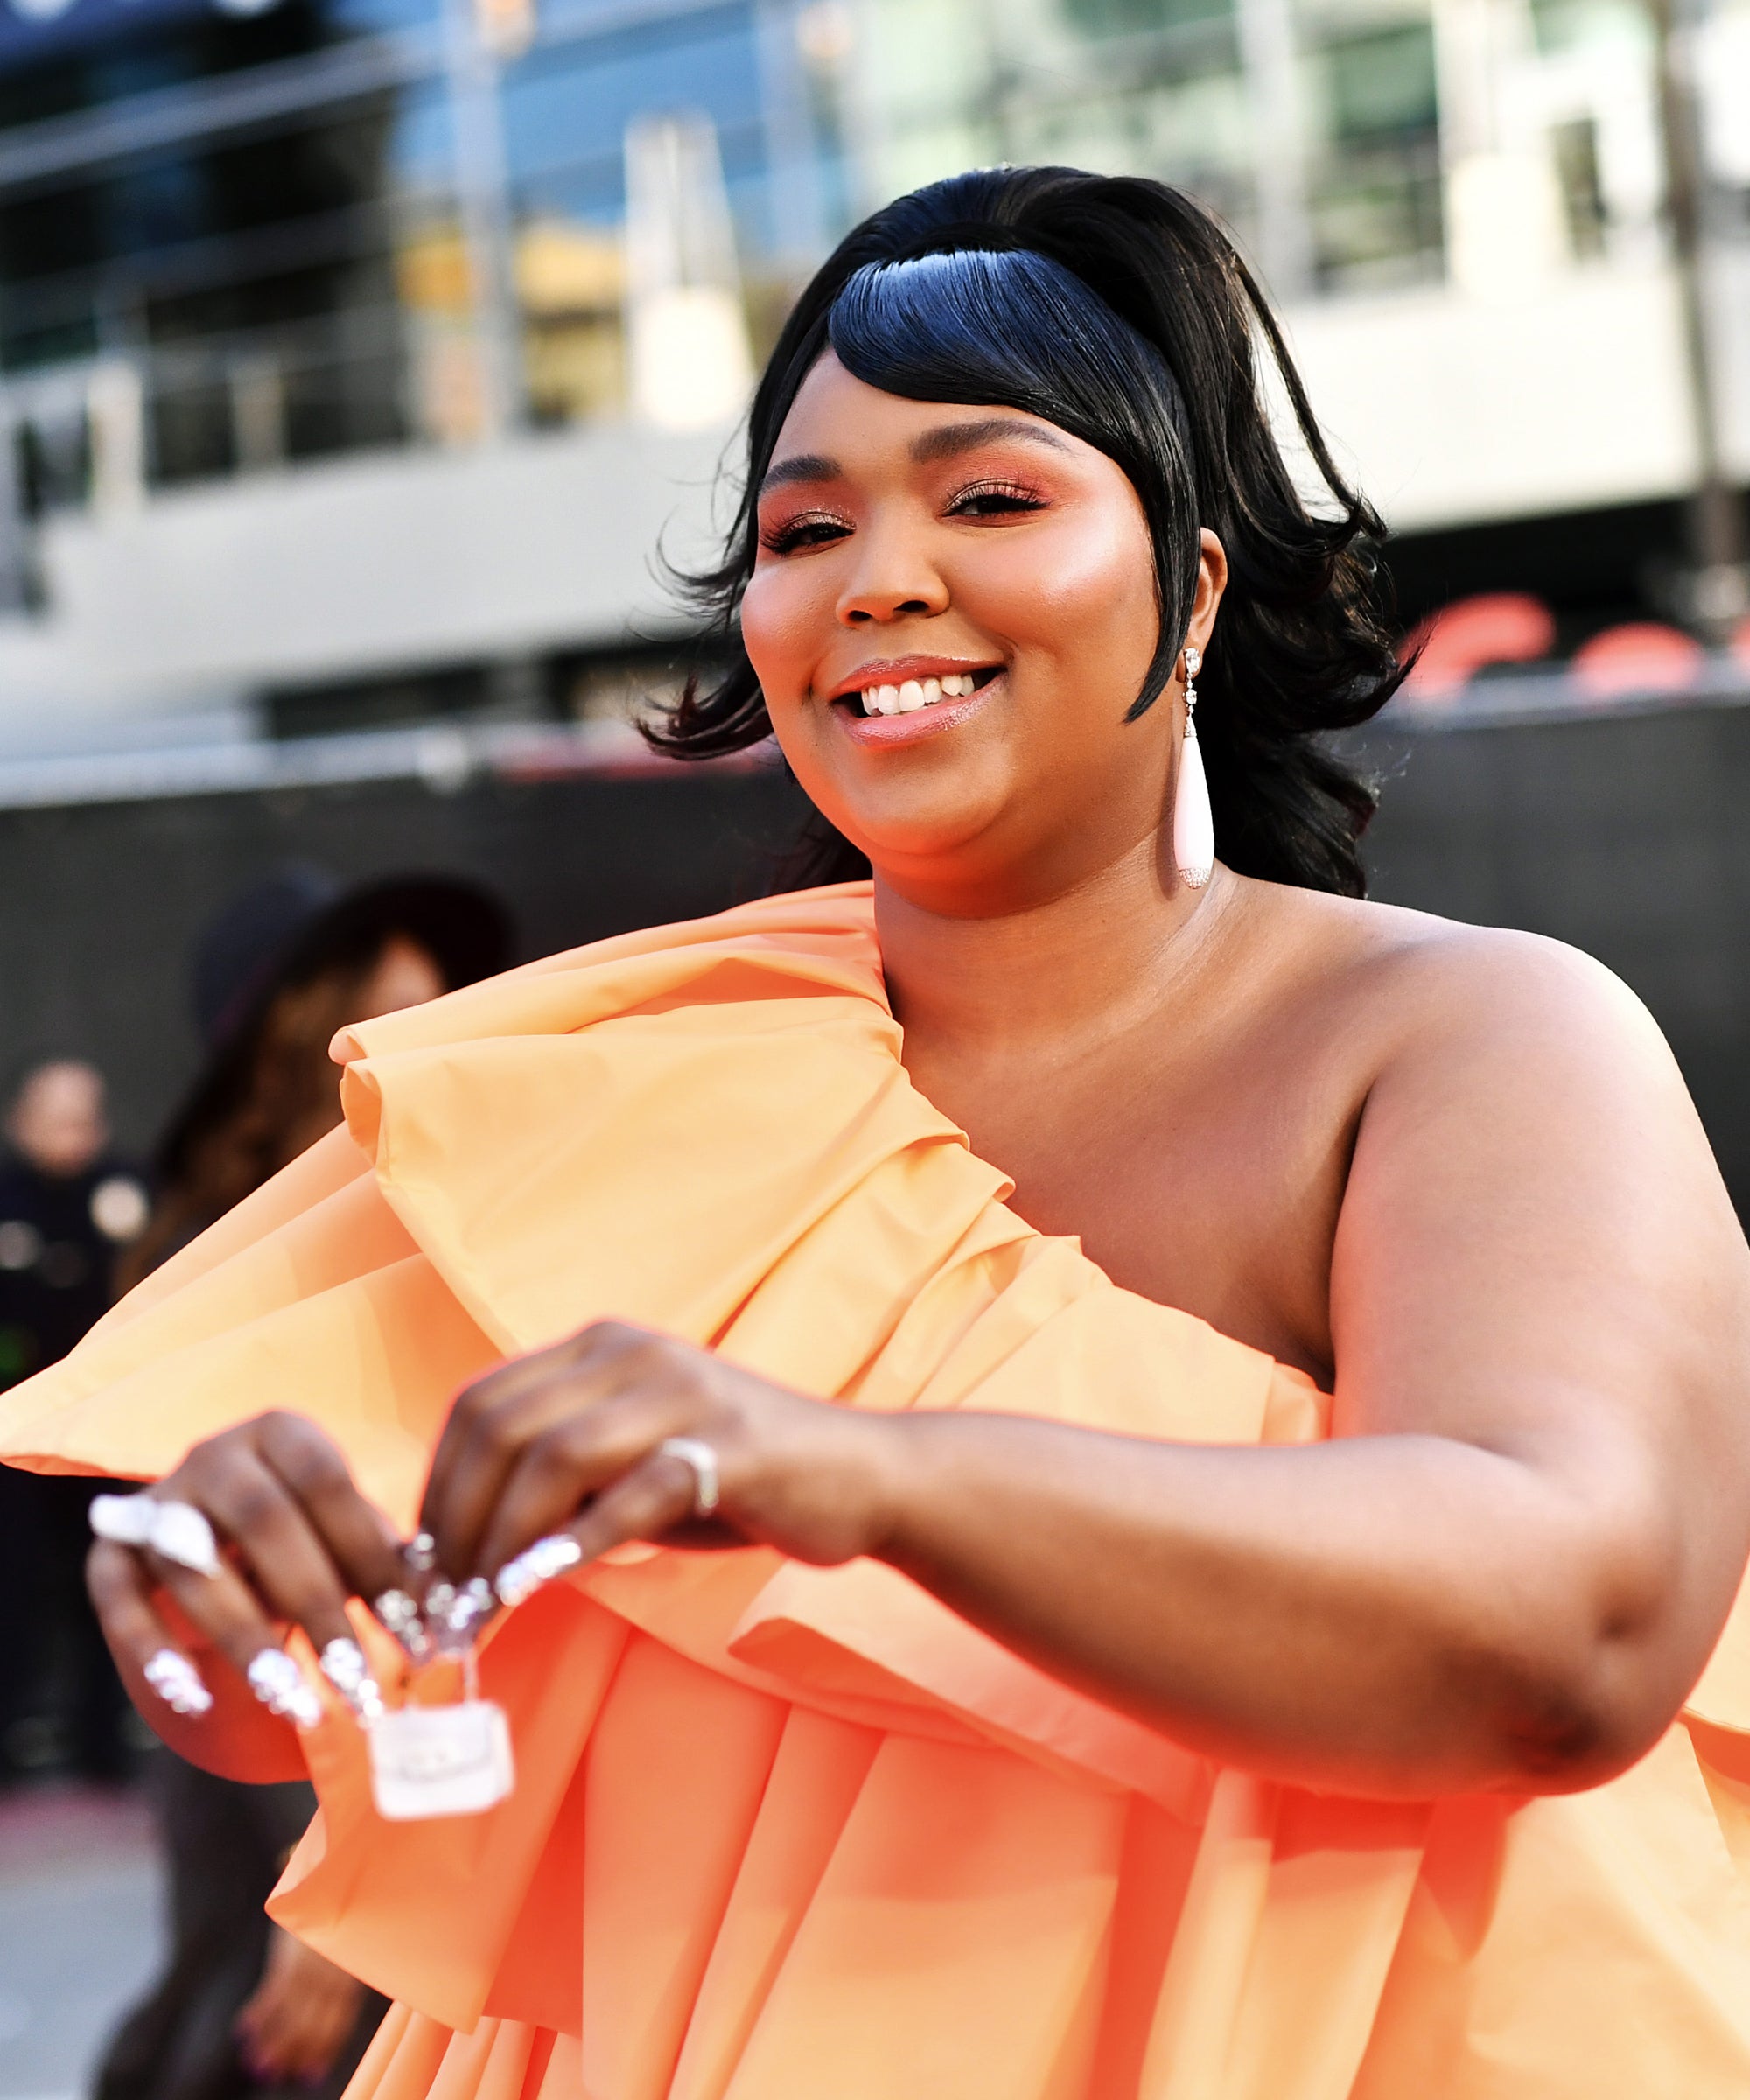 Lizzo Finally Reveals What's In That Tiny Purse Of Hers | News | MTV